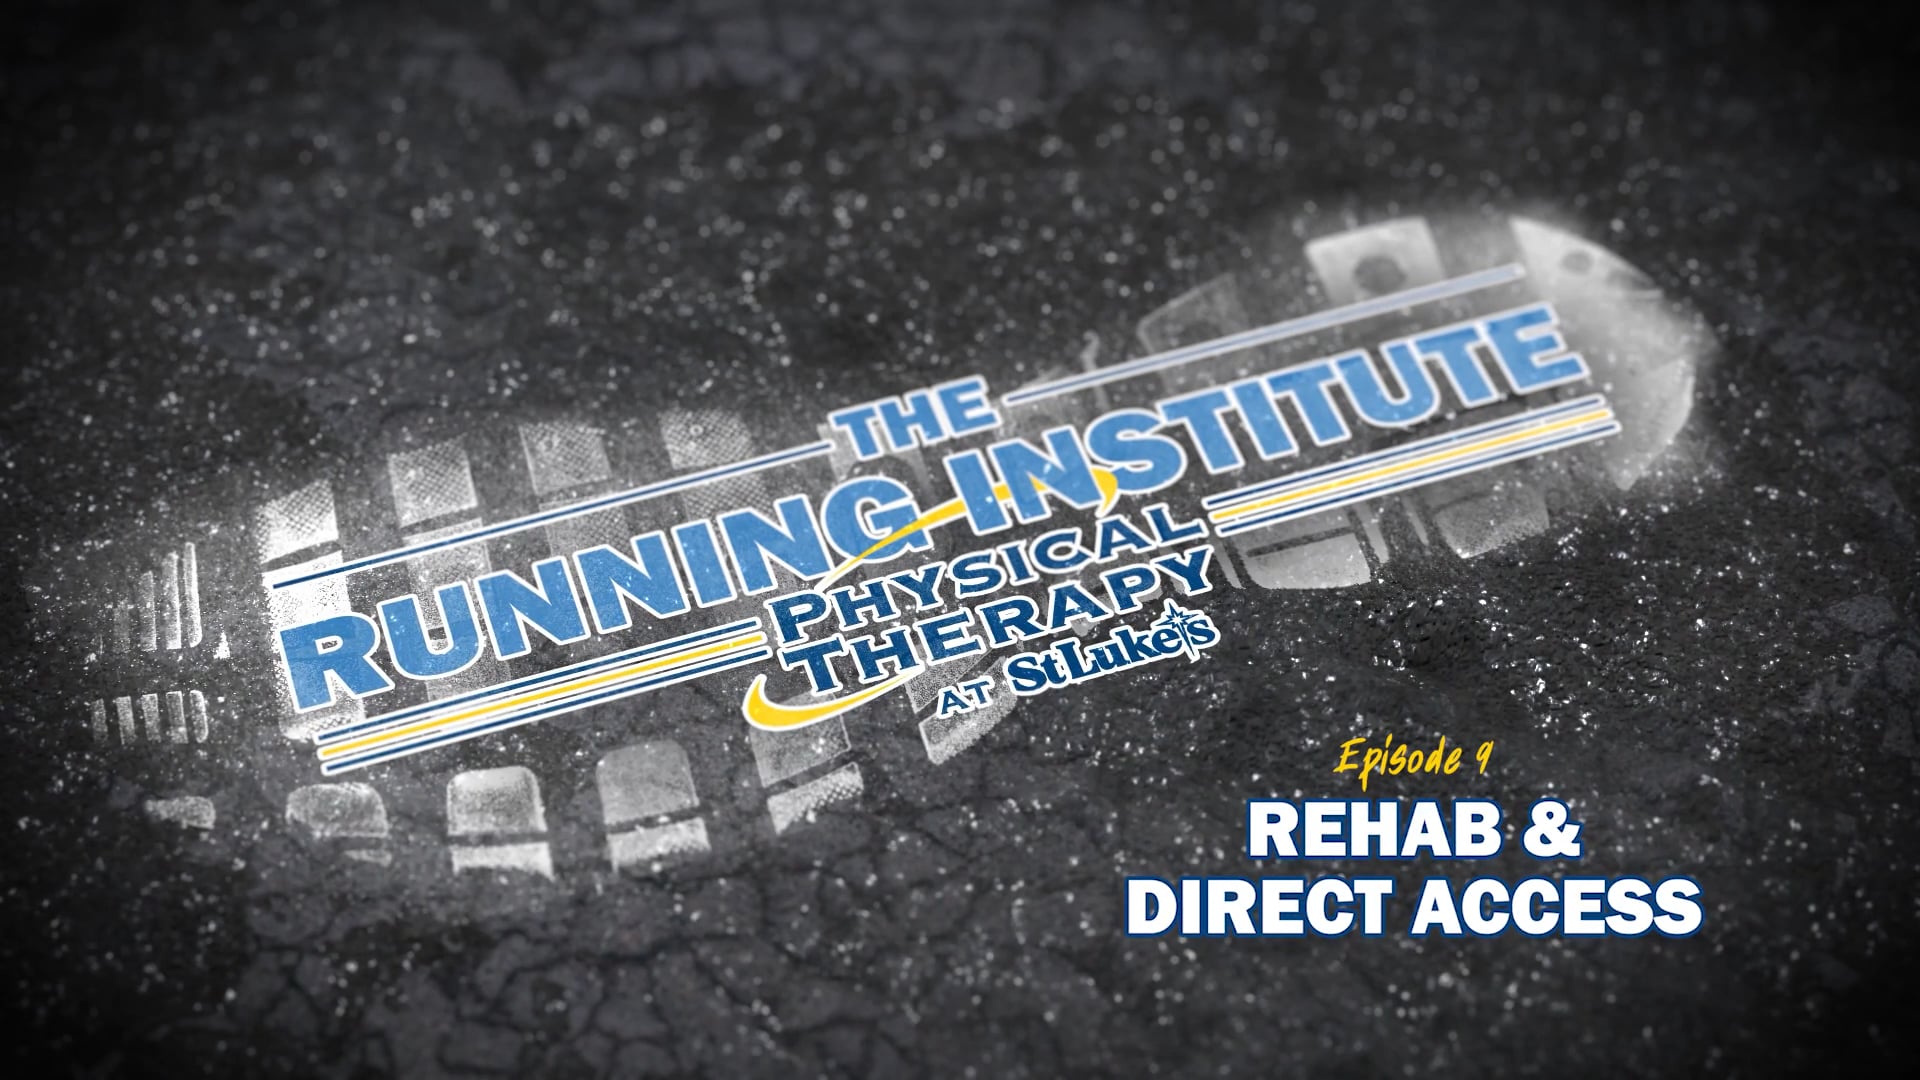 Ep. 9 - Rehab and Direct Access - PT at SLUHN Running Institute-.mp4